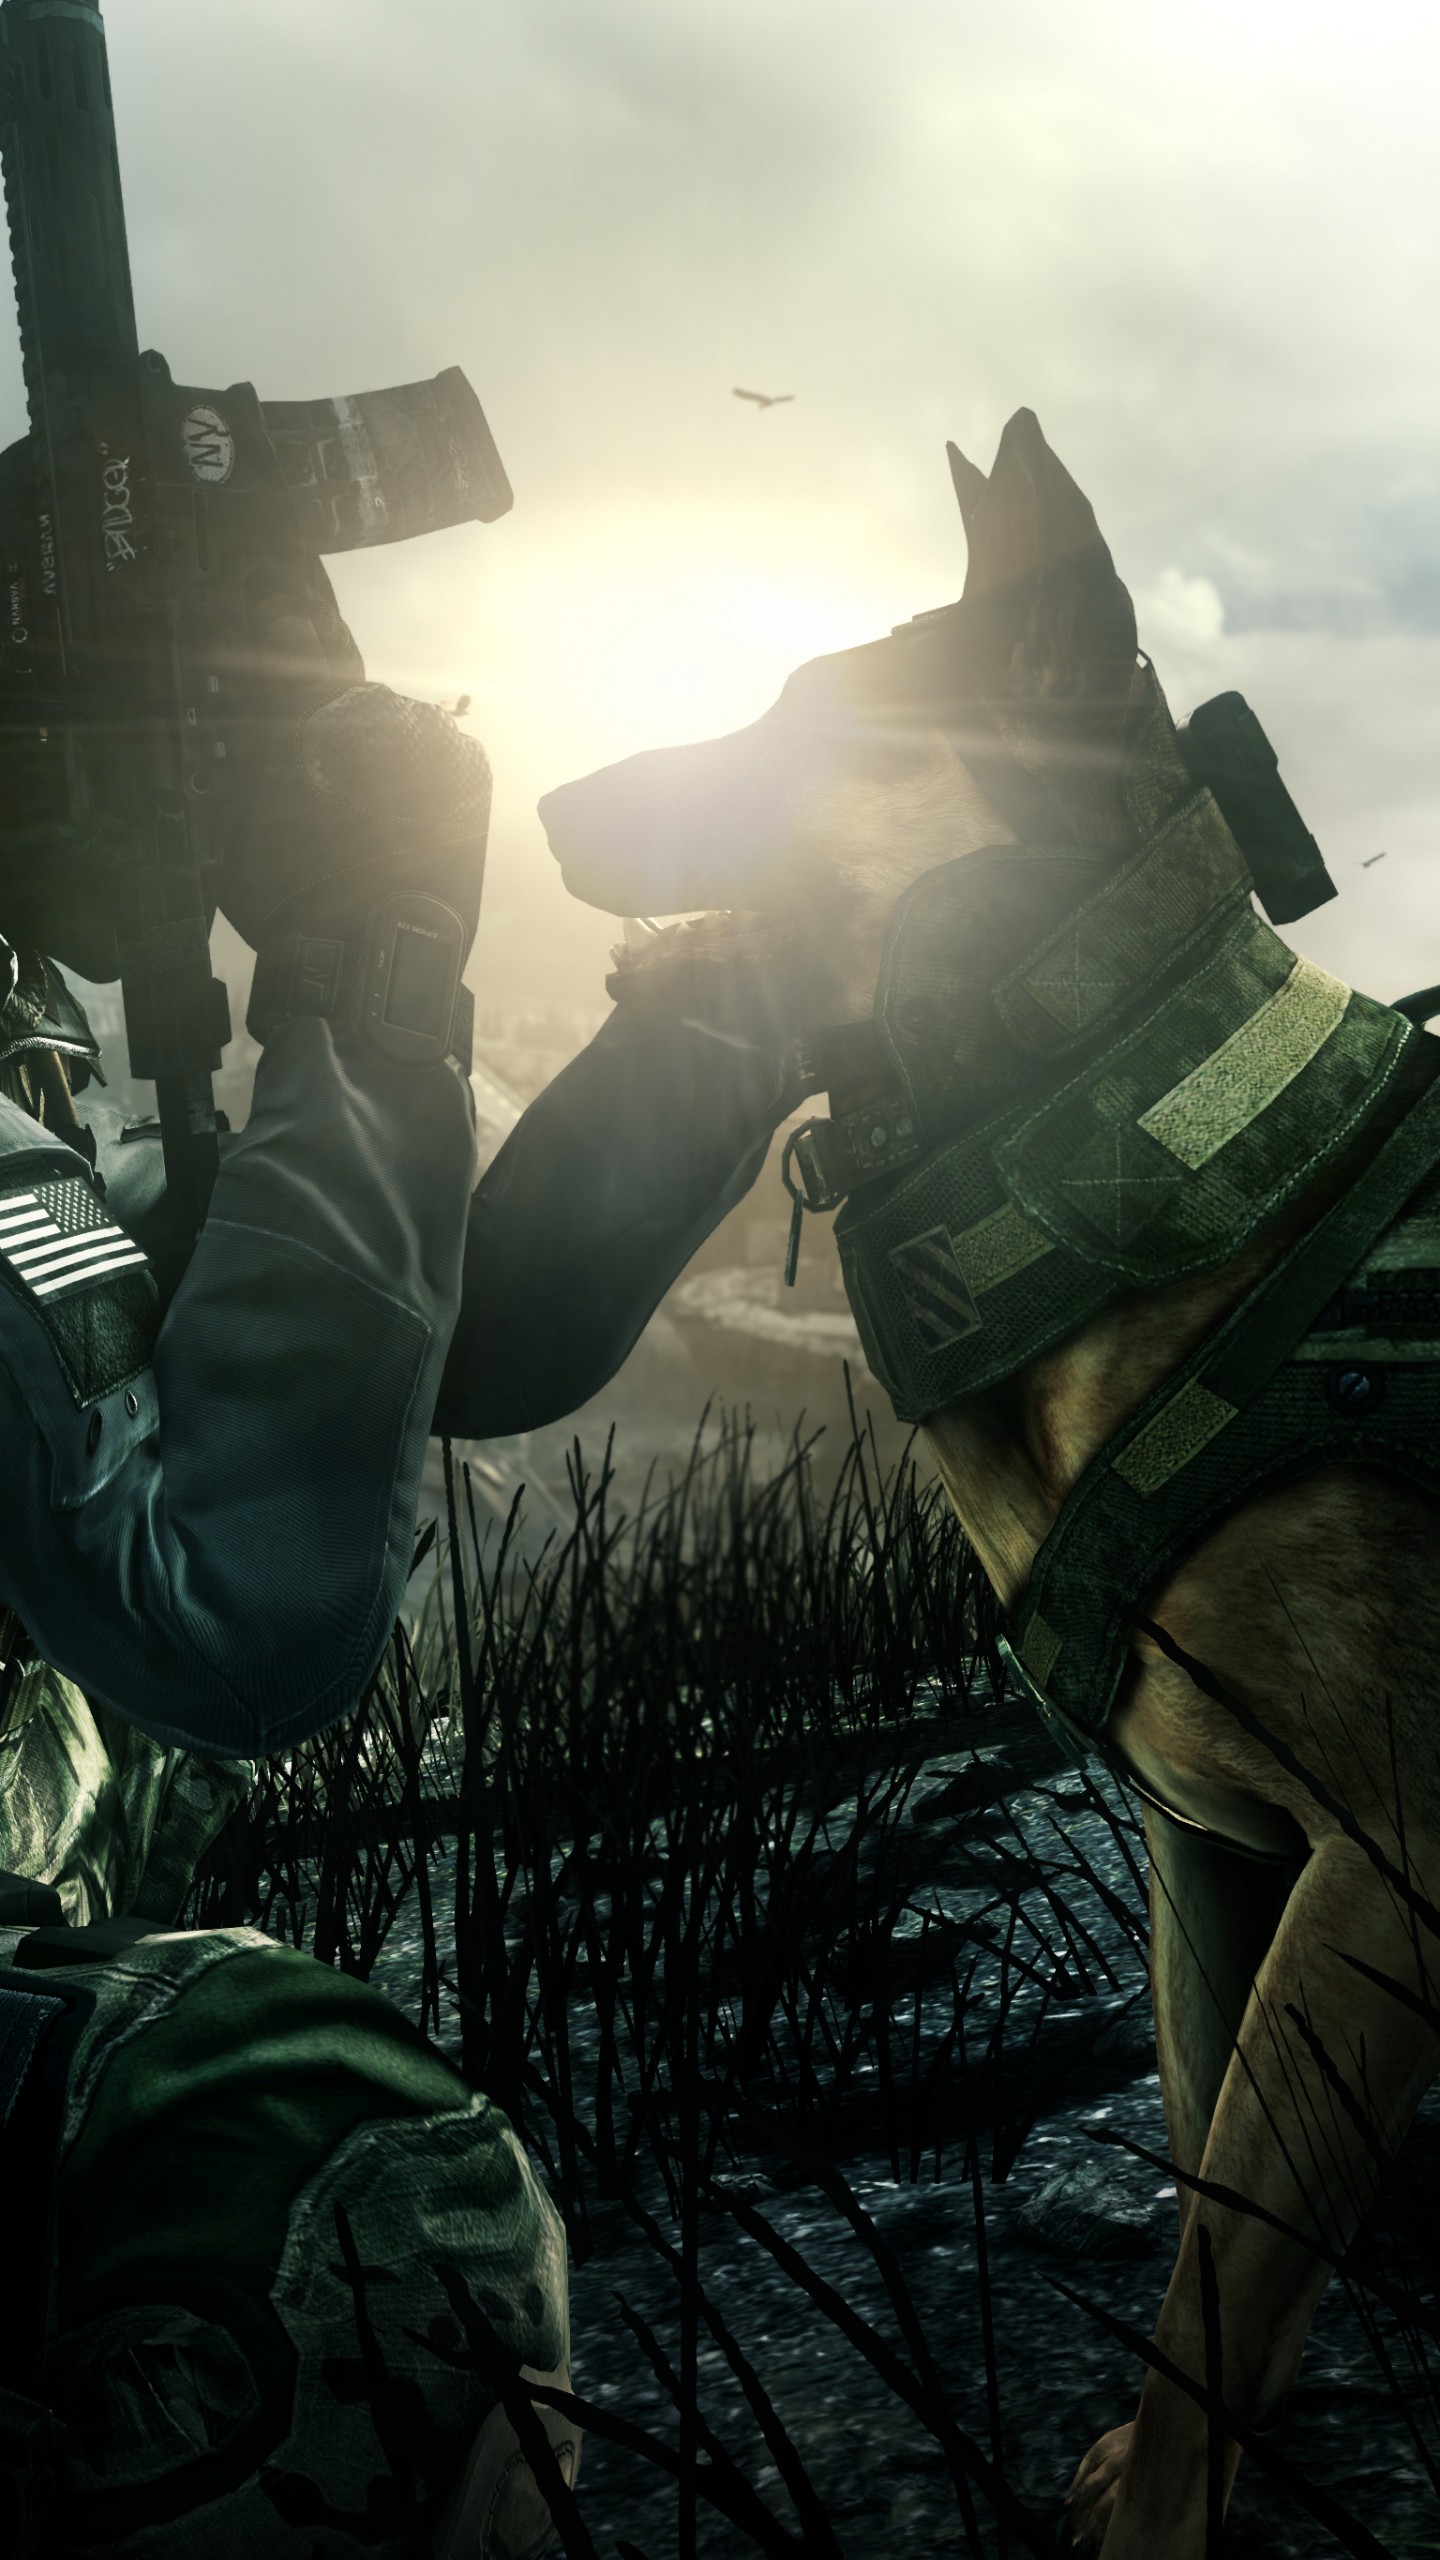 Wallpaper Call of Duty Ghosts, game, shooter, soldier, dog, rifle, CoD, Ghosts, multiplayer, screenshot, Games